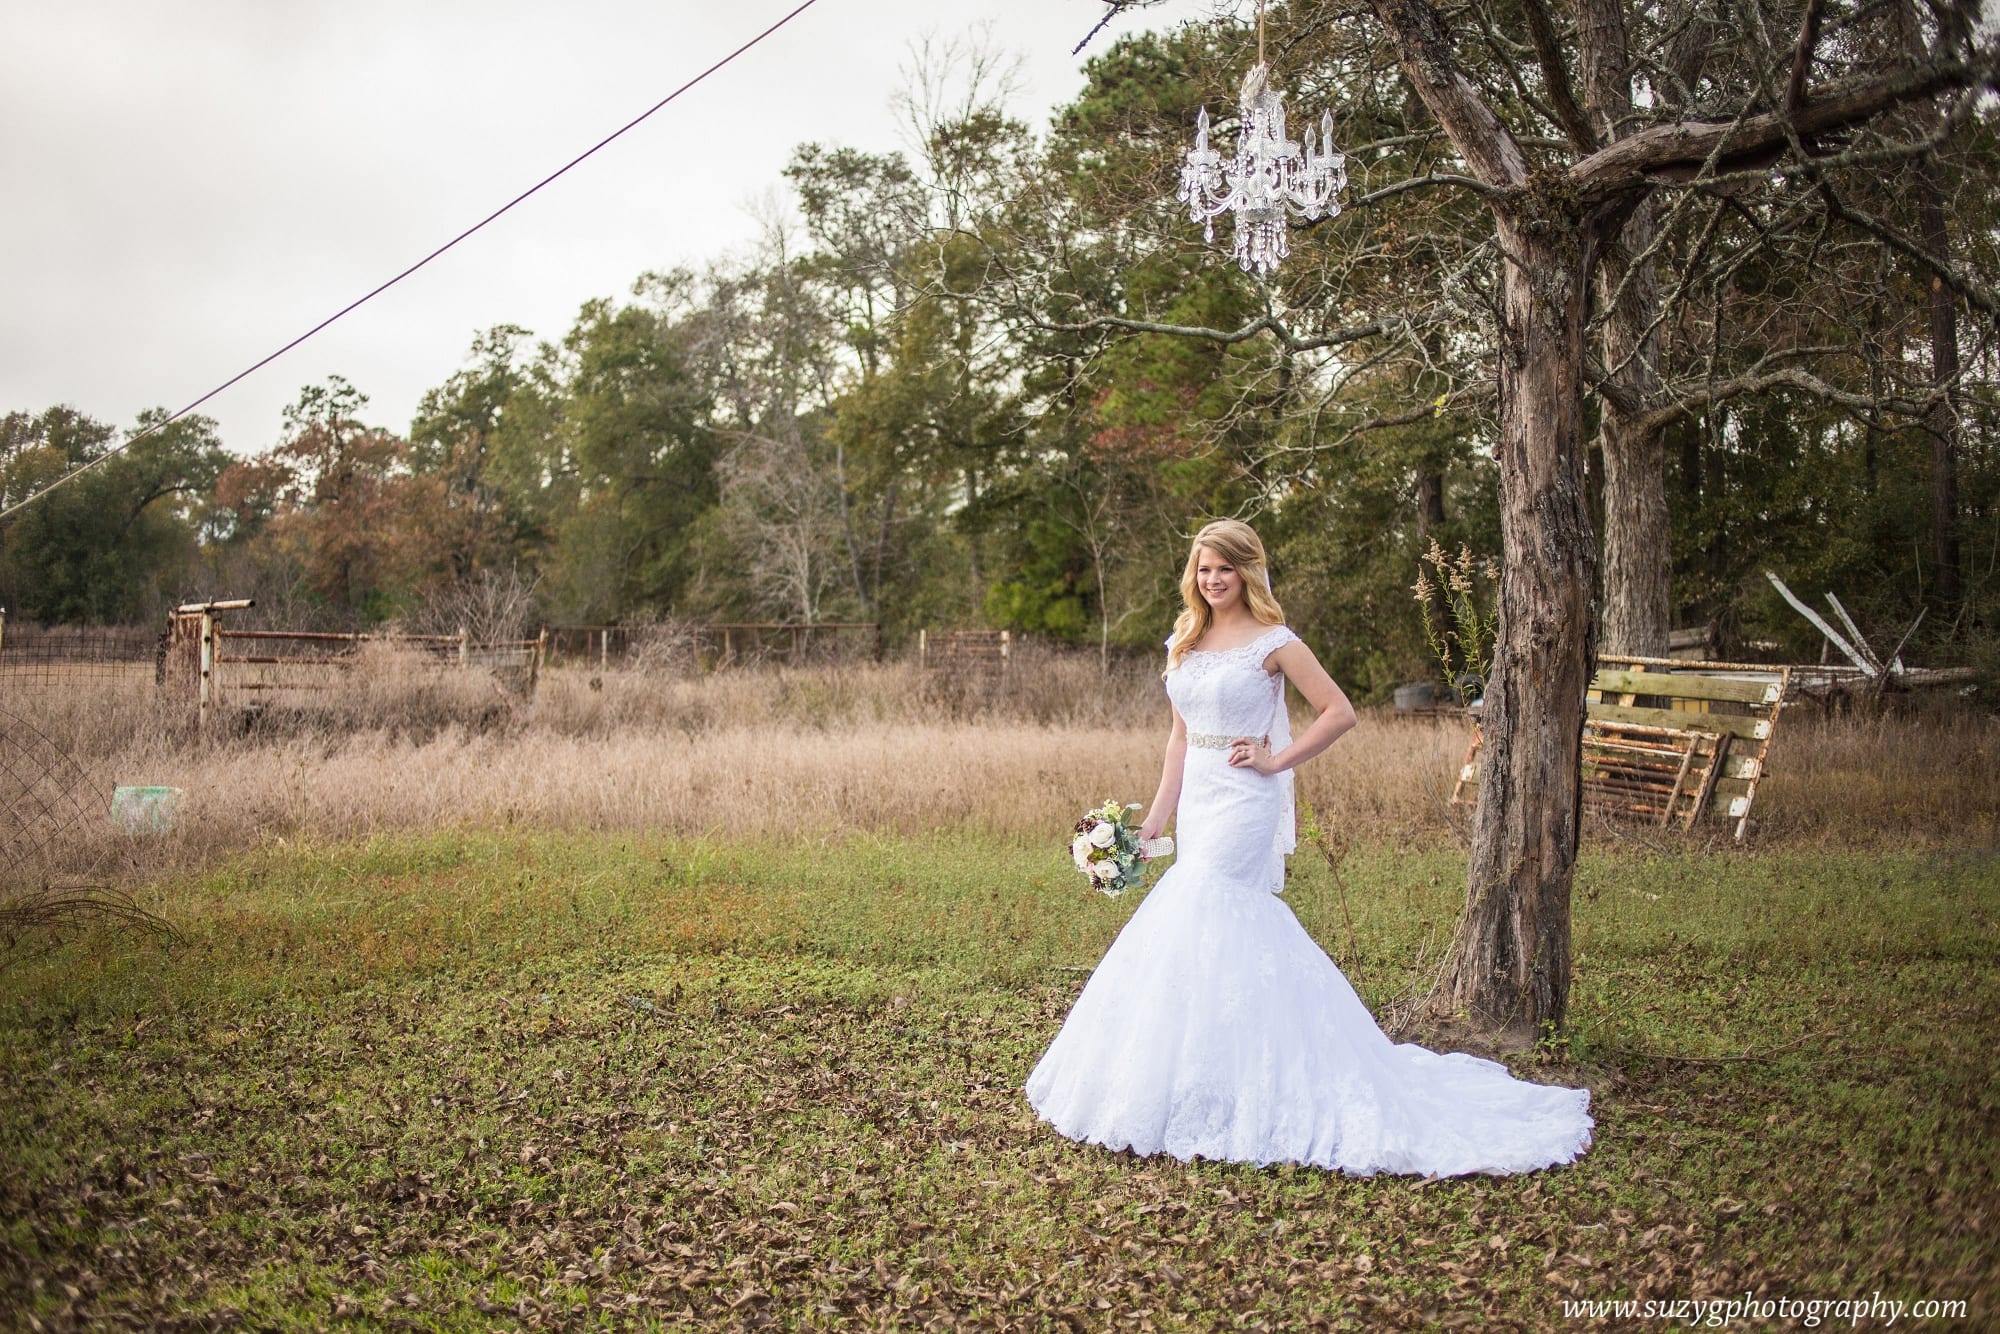 vows by victoria-lake charles-bridal-photography-suzy g-photography-suzygphotography_0002